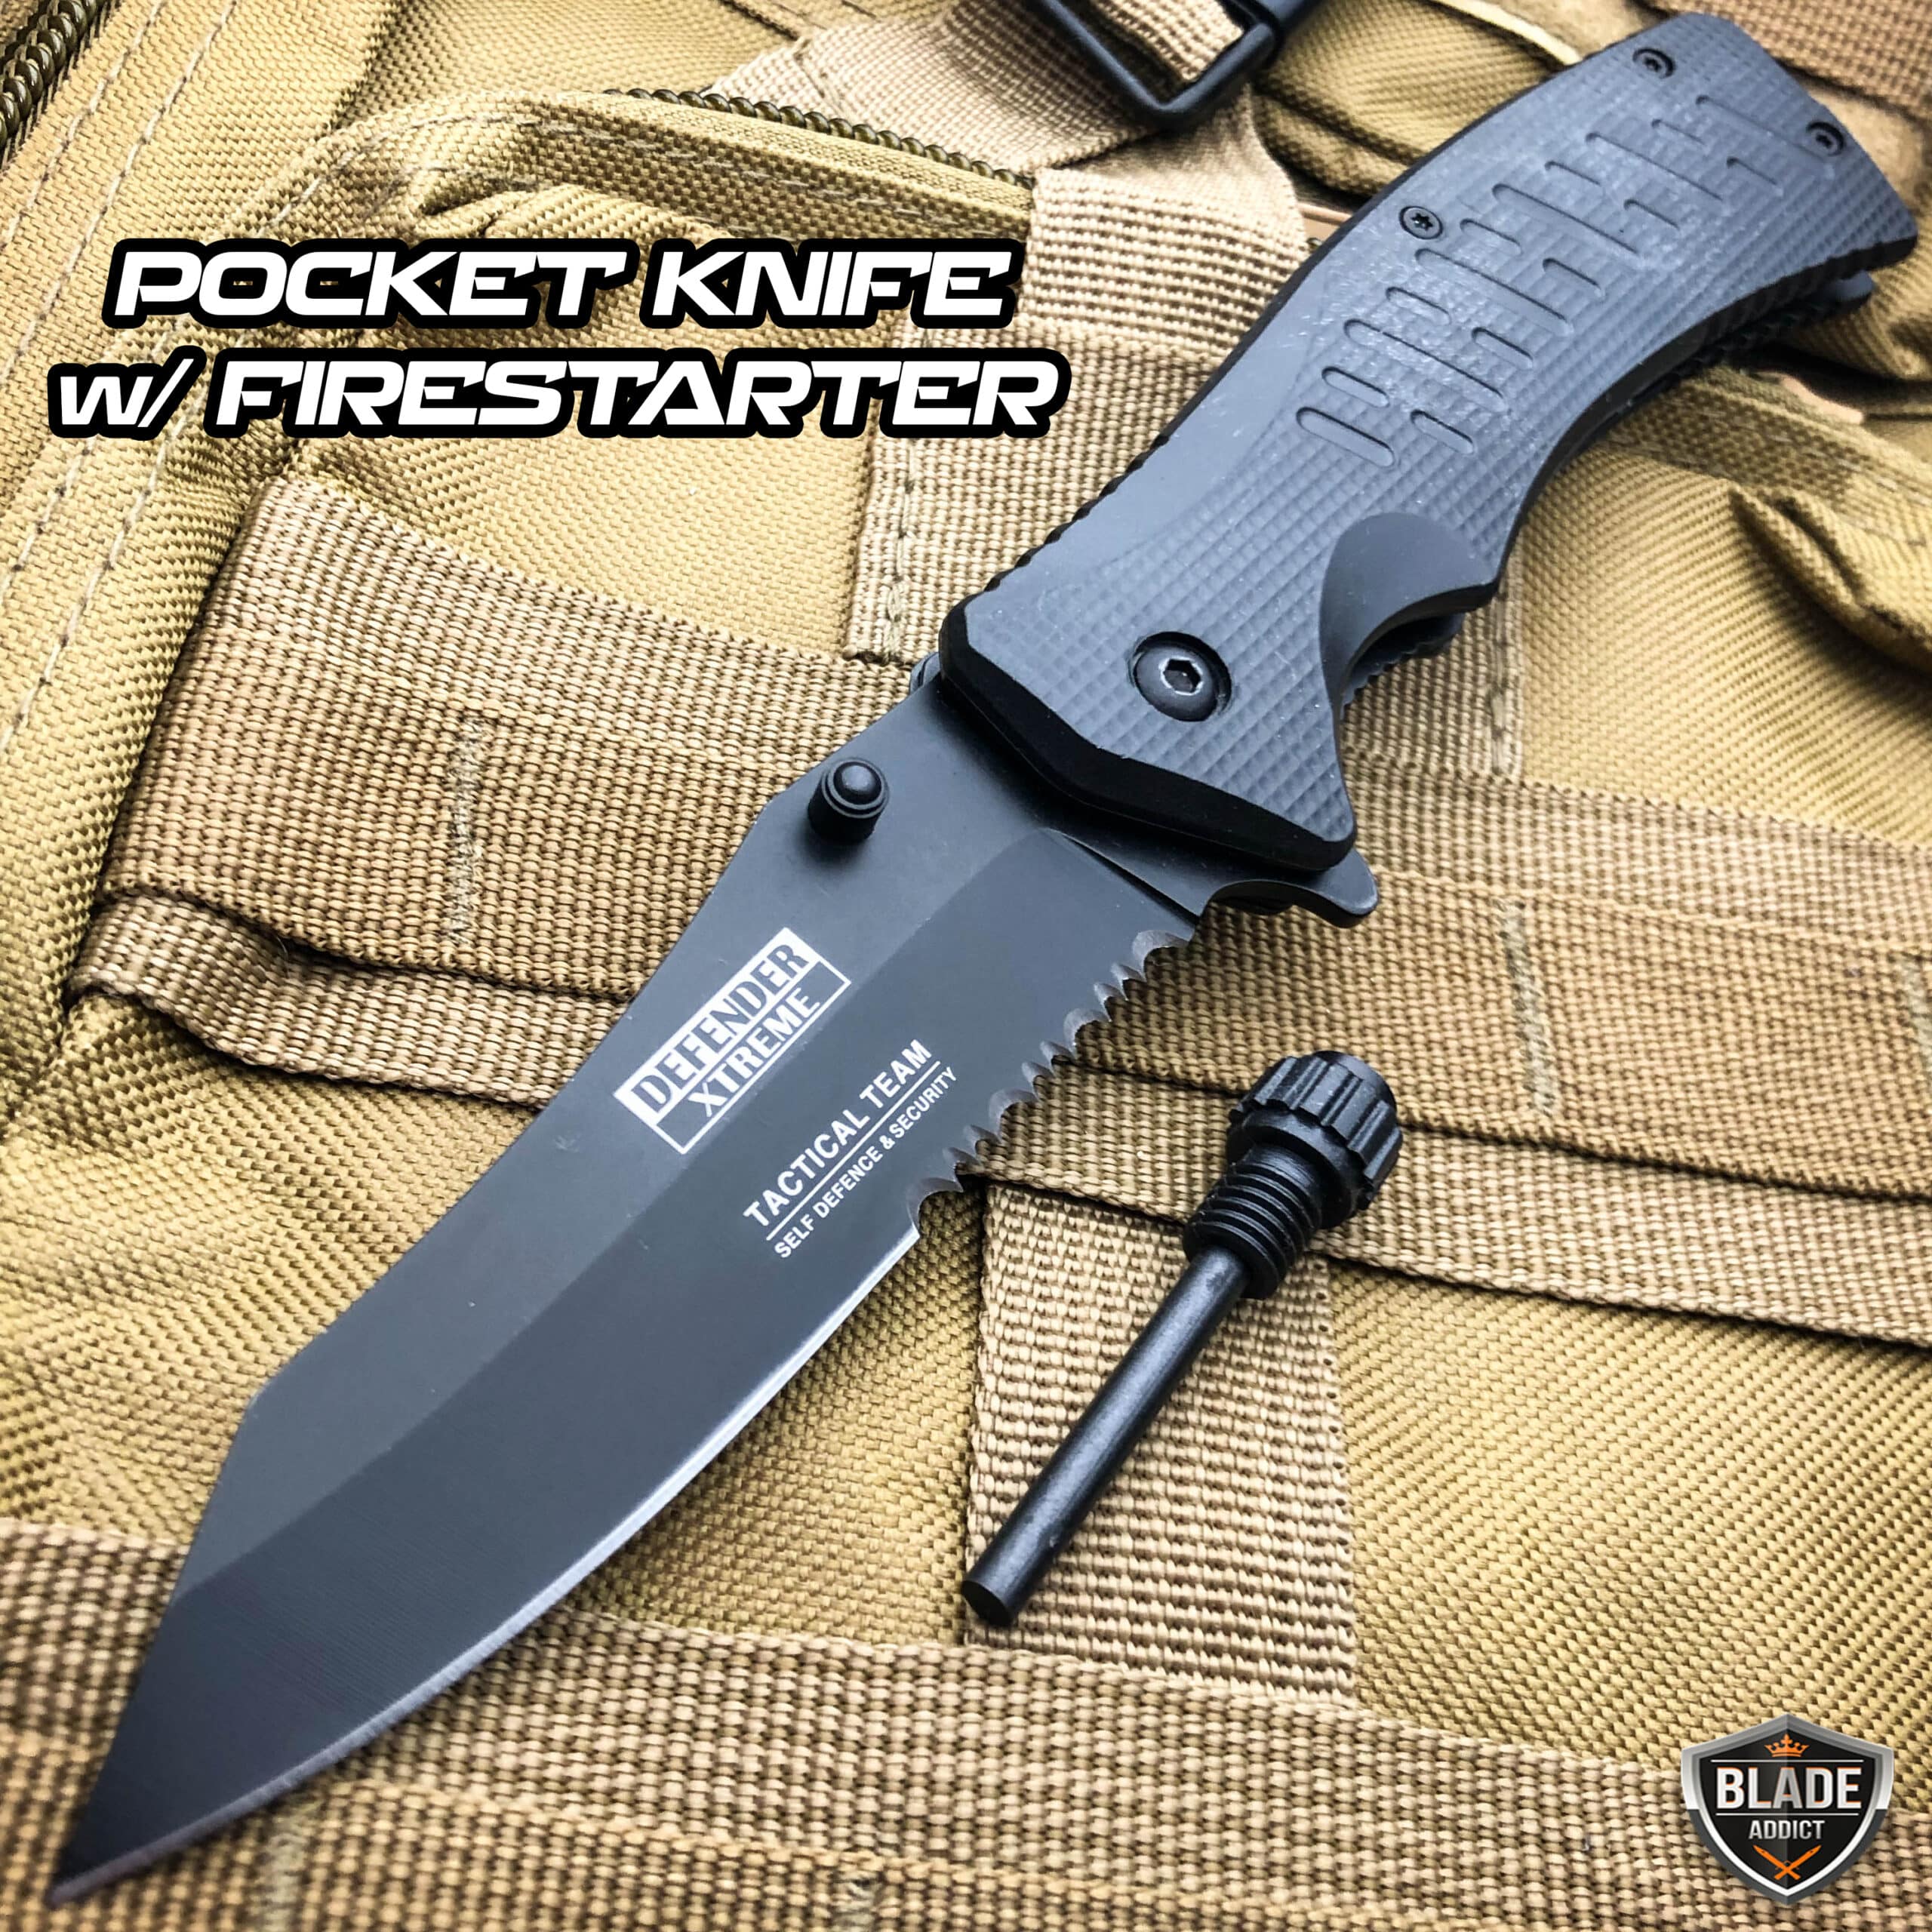 10.5" CAMO TACTICAL HUNTING KNIFE Survival Military Fixed Blade Bowie Camping